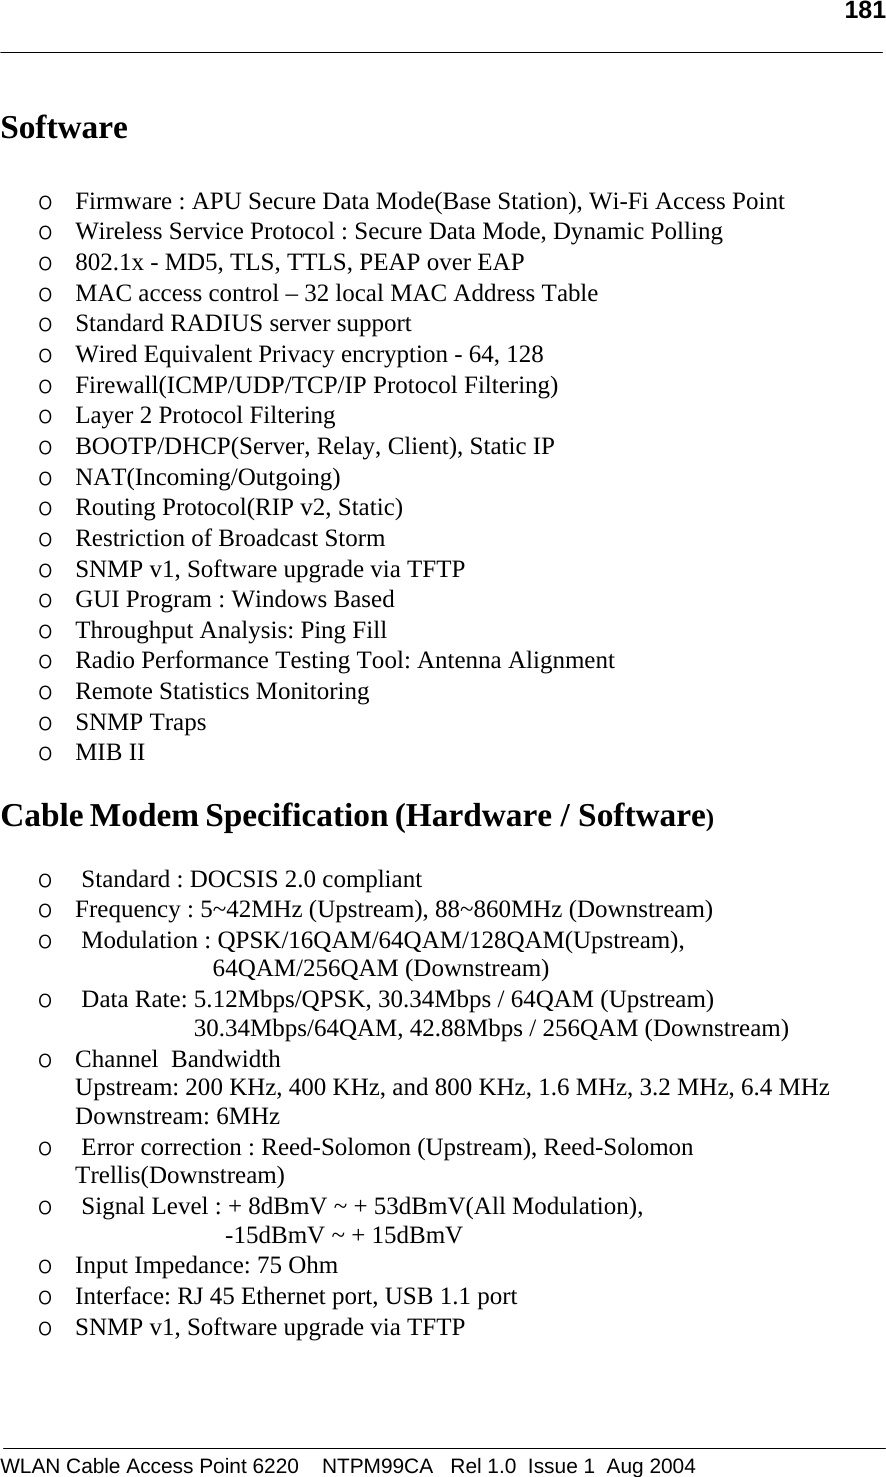   181  Software    o Firmware : APU Secure Data Mode(Base Station), Wi-Fi Access Point  o Wireless Service Protocol : Secure Data Mode, Dynamic Polling  o 802.1x - MD5, TLS, TTLS, PEAP over EAP o MAC access control – 32 local MAC Address Table     o Standard RADIUS server support            o Wired Equivalent Privacy encryption - 64, 128 o Firewall(ICMP/UDP/TCP/IP Protocol Filtering) o Layer 2 Protocol Filtering o BOOTP/DHCP(Server, Relay, Client), Static IP  o NAT(Incoming/Outgoing) o Routing Protocol(RIP v2, Static)  o Restriction of Broadcast Storm  o SNMP v1, Software upgrade via TFTP o GUI Program : Windows Based o Throughput Analysis: Ping Fill  o Radio Performance Testing Tool: Antenna Alignment o Remote Statistics Monitoring o SNMP Traps o MIB II   Cable Modem Specification (Hardware / Software)  o  Standard : DOCSIS 2.0 compliant o Frequency : 5~42MHz (Upstream), 88~860MHz (Downstream) o  Modulation : QPSK/16QAM/64QAM/128QAM(Upstream),                                     64QAM/256QAM (Downstream) o  Data Rate: 5.12Mbps/QPSK, 30.34Mbps / 64QAM (Upstream)                        30.34Mbps/64QAM, 42.88Mbps / 256QAM (Downstream) o Channel  Bandwidth  Upstream: 200 KHz, 400 KHz, and 800 KHz, 1.6 MHz, 3.2 MHz, 6.4 MHz  Downstream: 6MHz o  Error correction : Reed-Solomon (Upstream), Reed-Solomon Trellis(Downstream) o  Signal Level : + 8dBmV ~ + 53dBmV(All Modulation),                                -15dBmV ~ + 15dBmV o Input Impedance: 75 Ohm o Interface: RJ 45 Ethernet port, USB 1.1 port o SNMP v1, Software upgrade via TFTP    WLAN Cable Access Point 6220    NTPM99CA   Rel 1.0  Issue 1  Aug 2004 